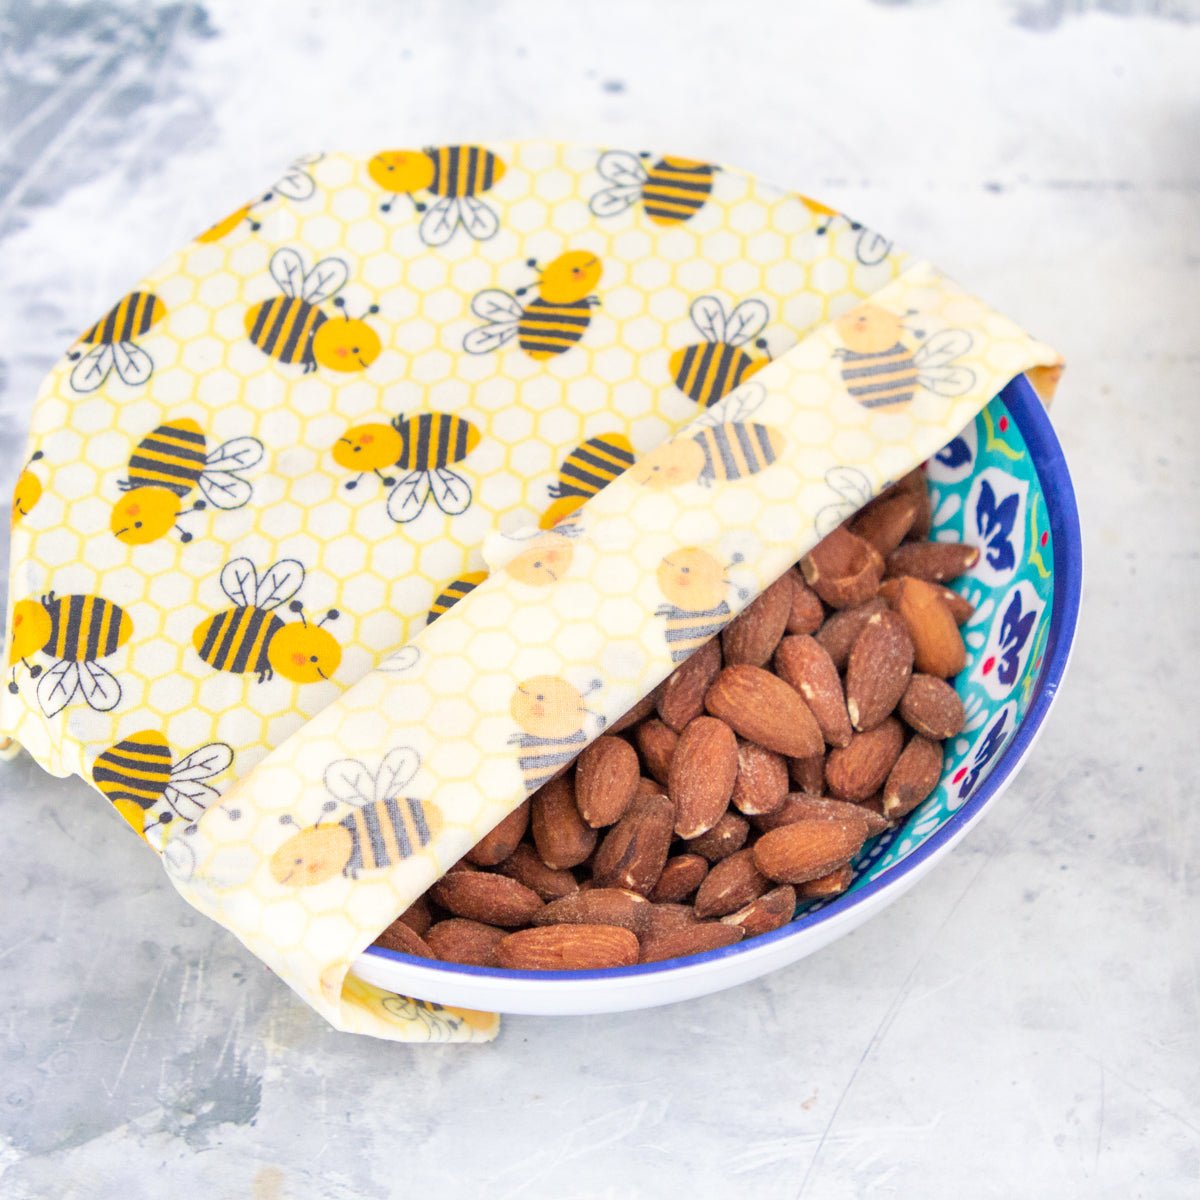 Beeswax food wraps you can make at home - Our Little Suburban Farmhouse